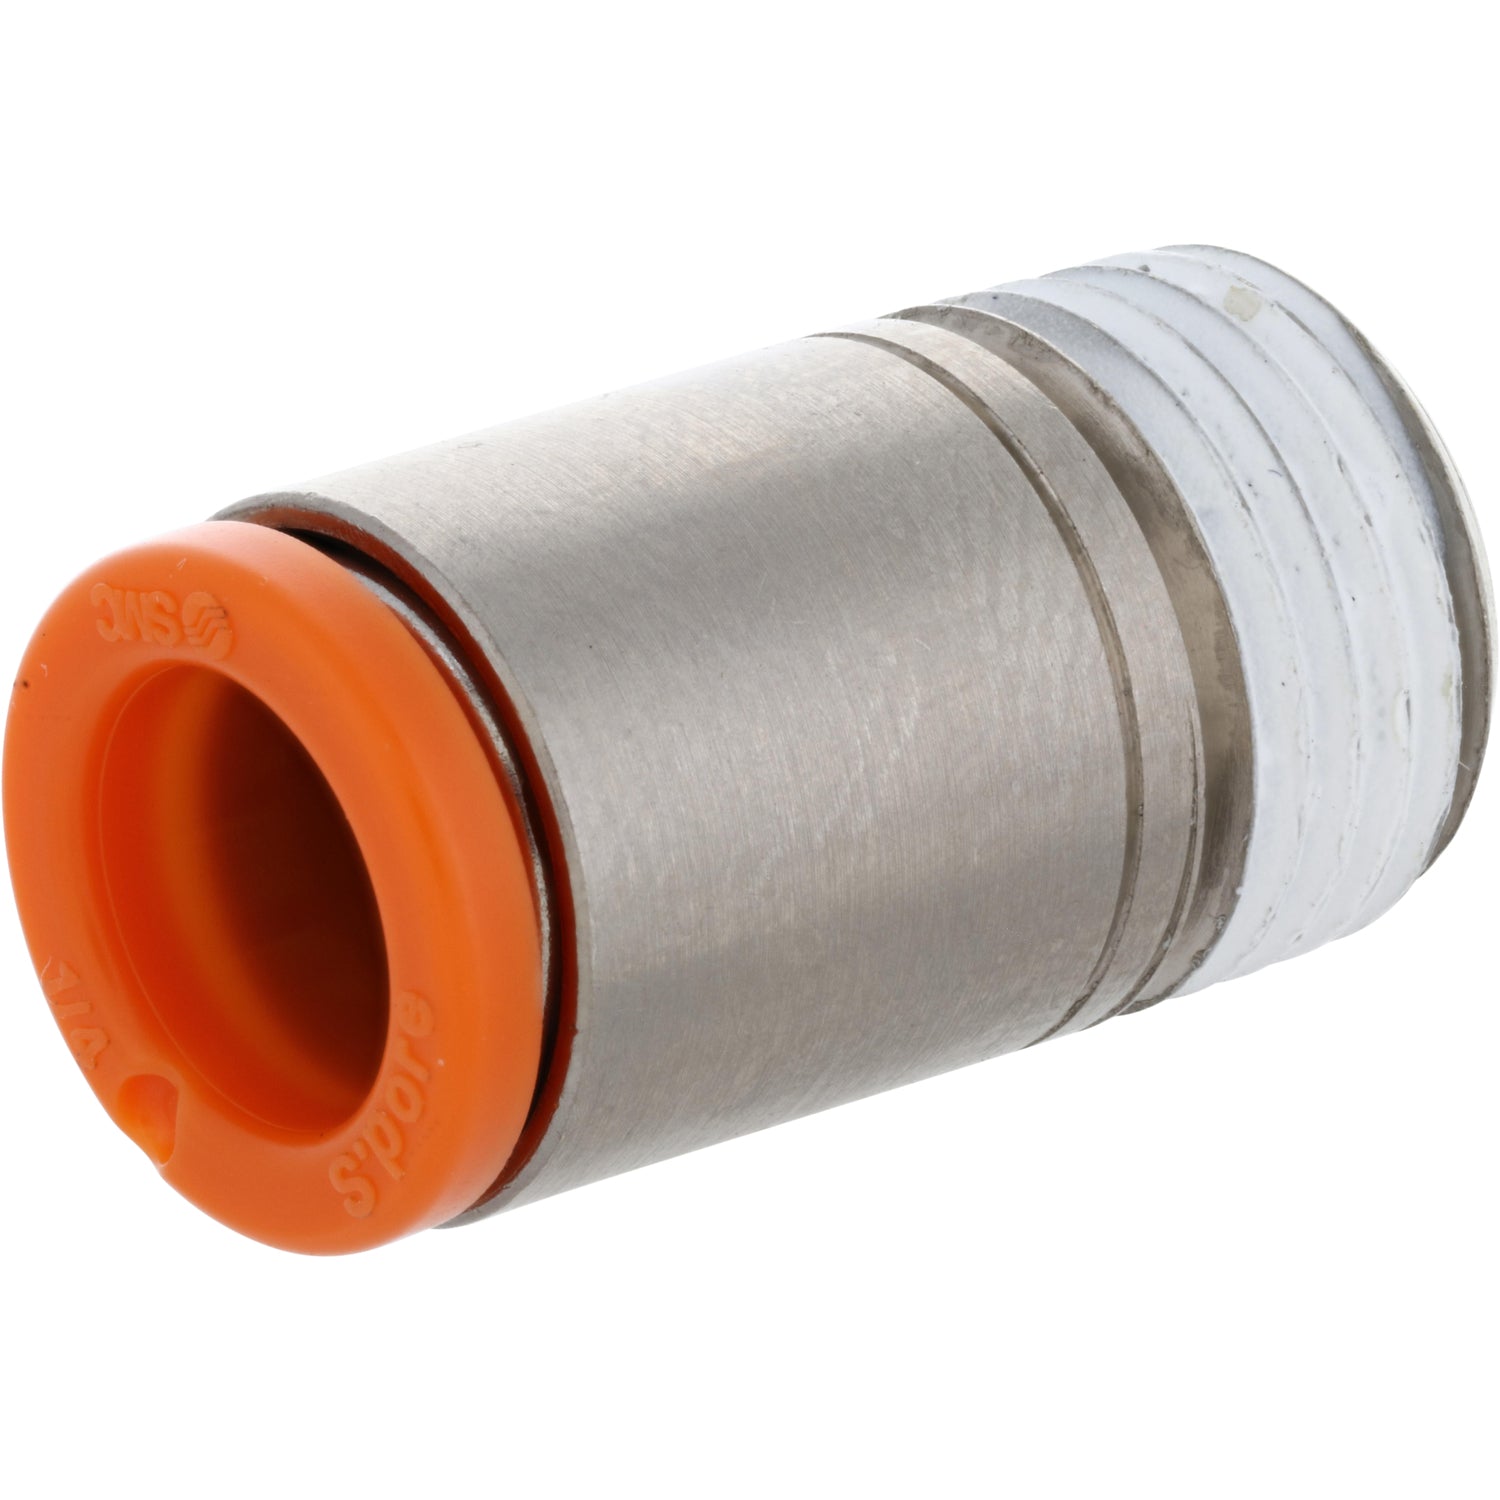 stainless steel and orange plastic push connect fitting on white background. 